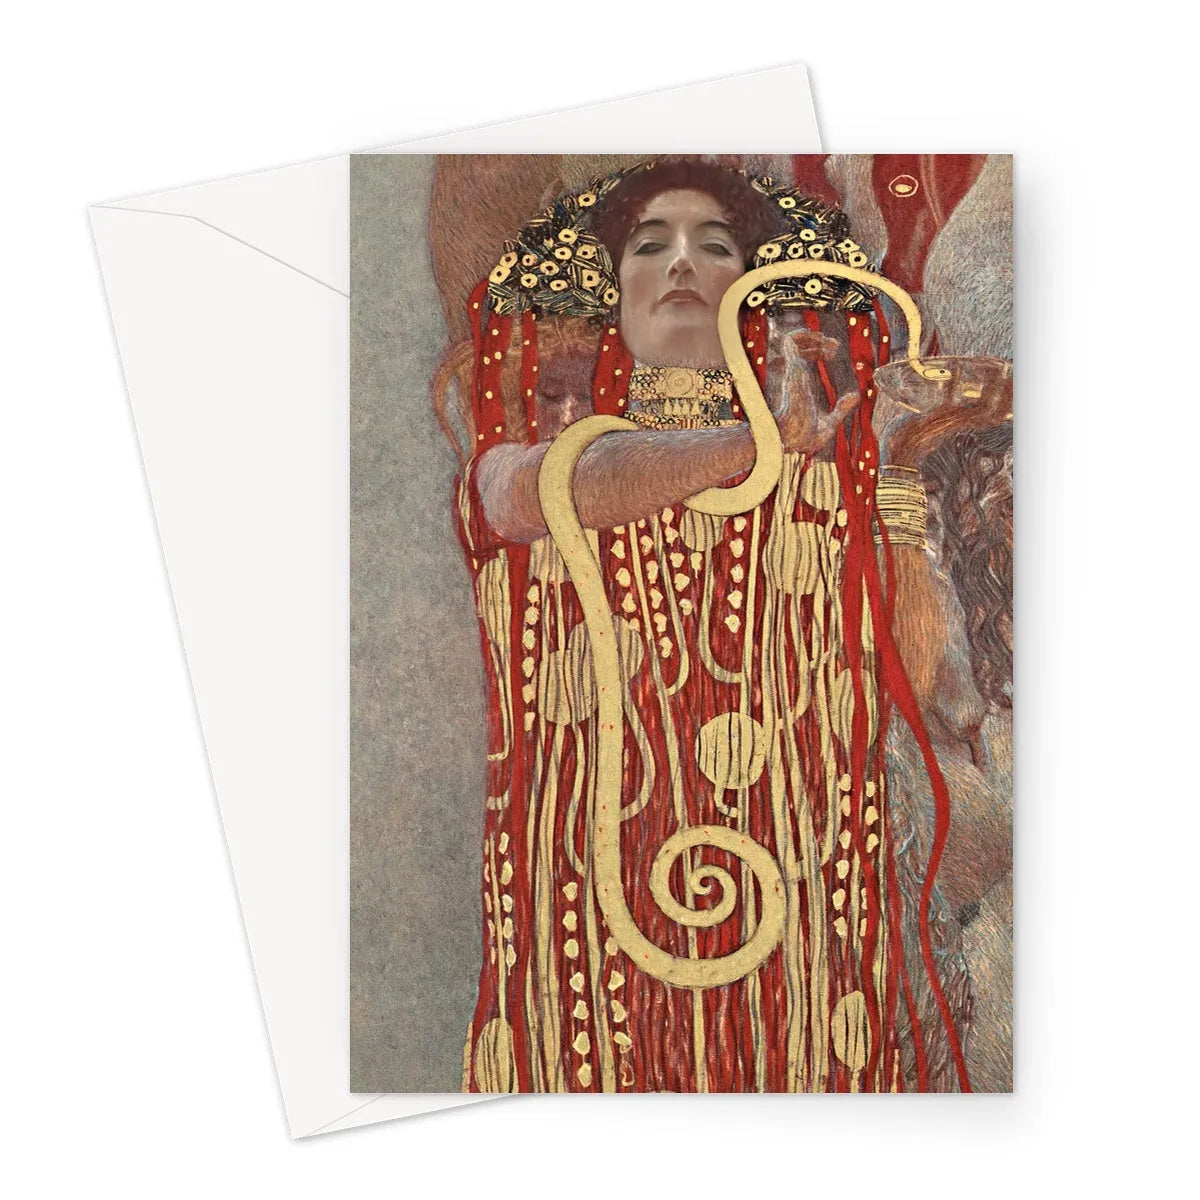 Hygieia By Gustav Klimt Greeting Card - A5 Portrait / 10 Cards - Greeting & Note Cards - Aesthetic Art